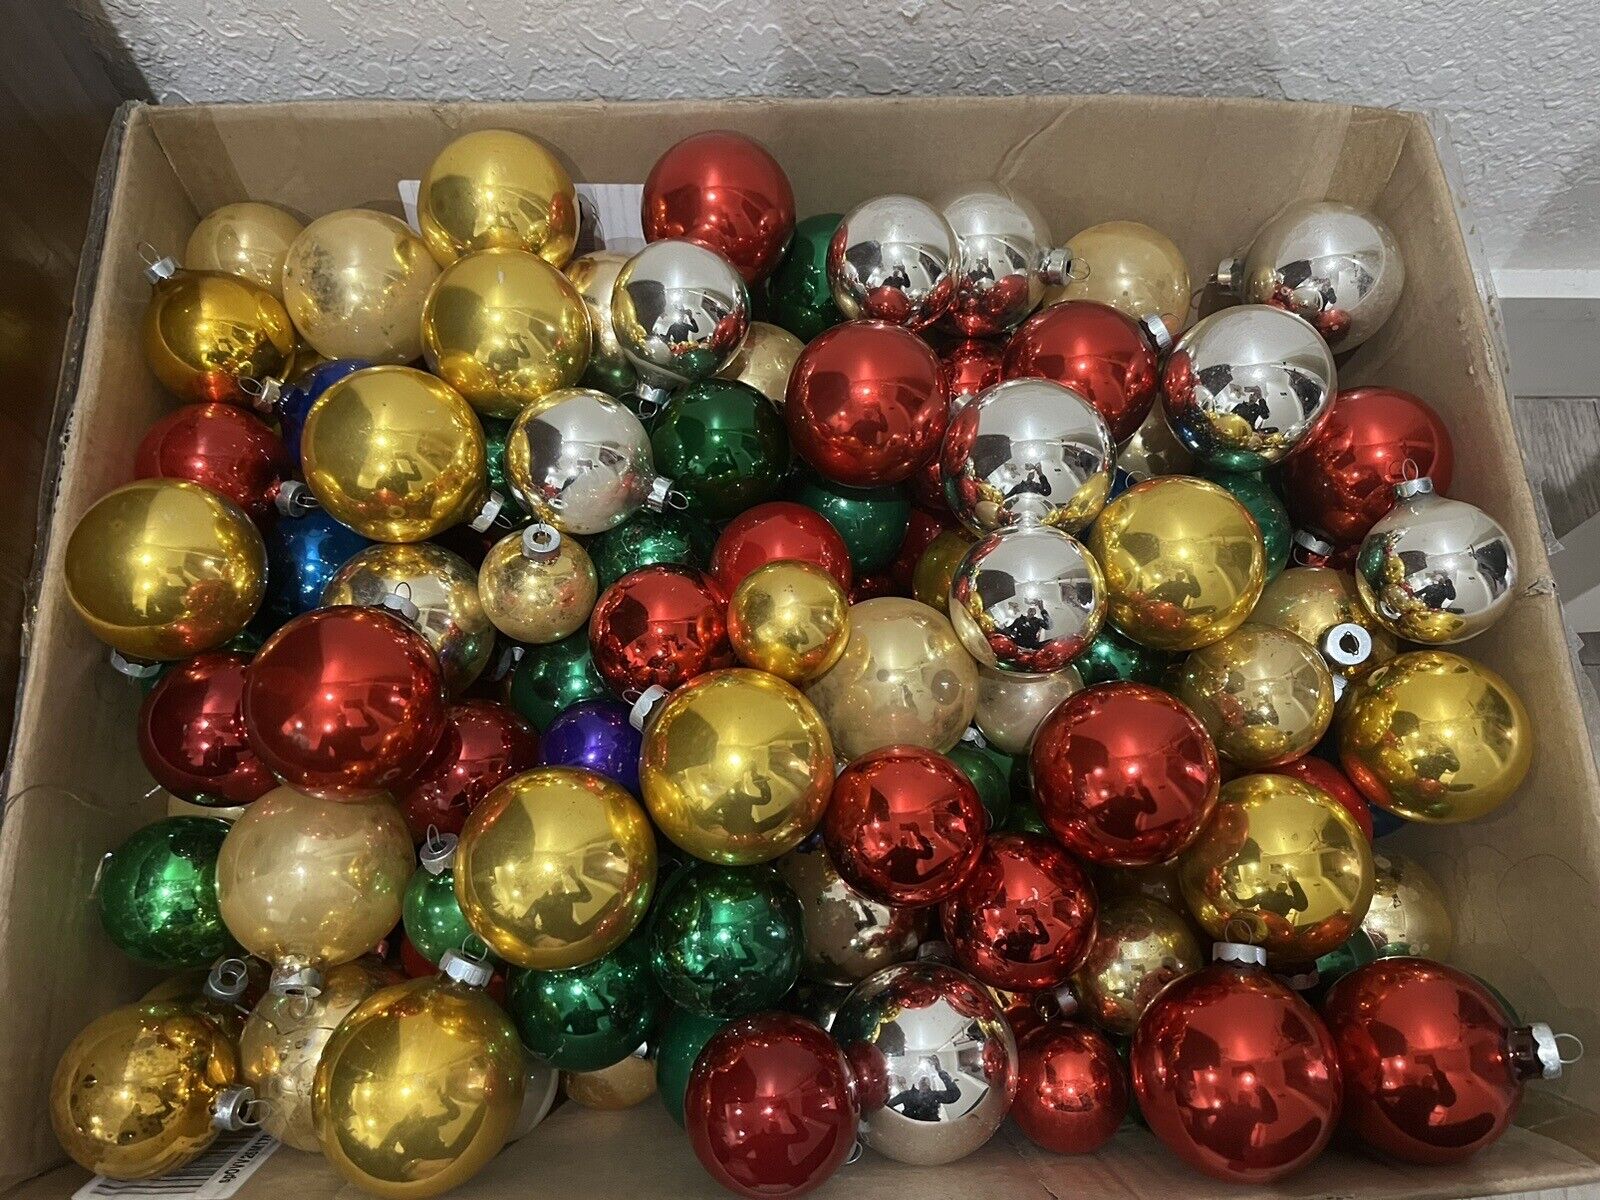 Lot/10 Vintage Glass Ball Christmas Ornaments. Size & Color Vary.  See Descr.